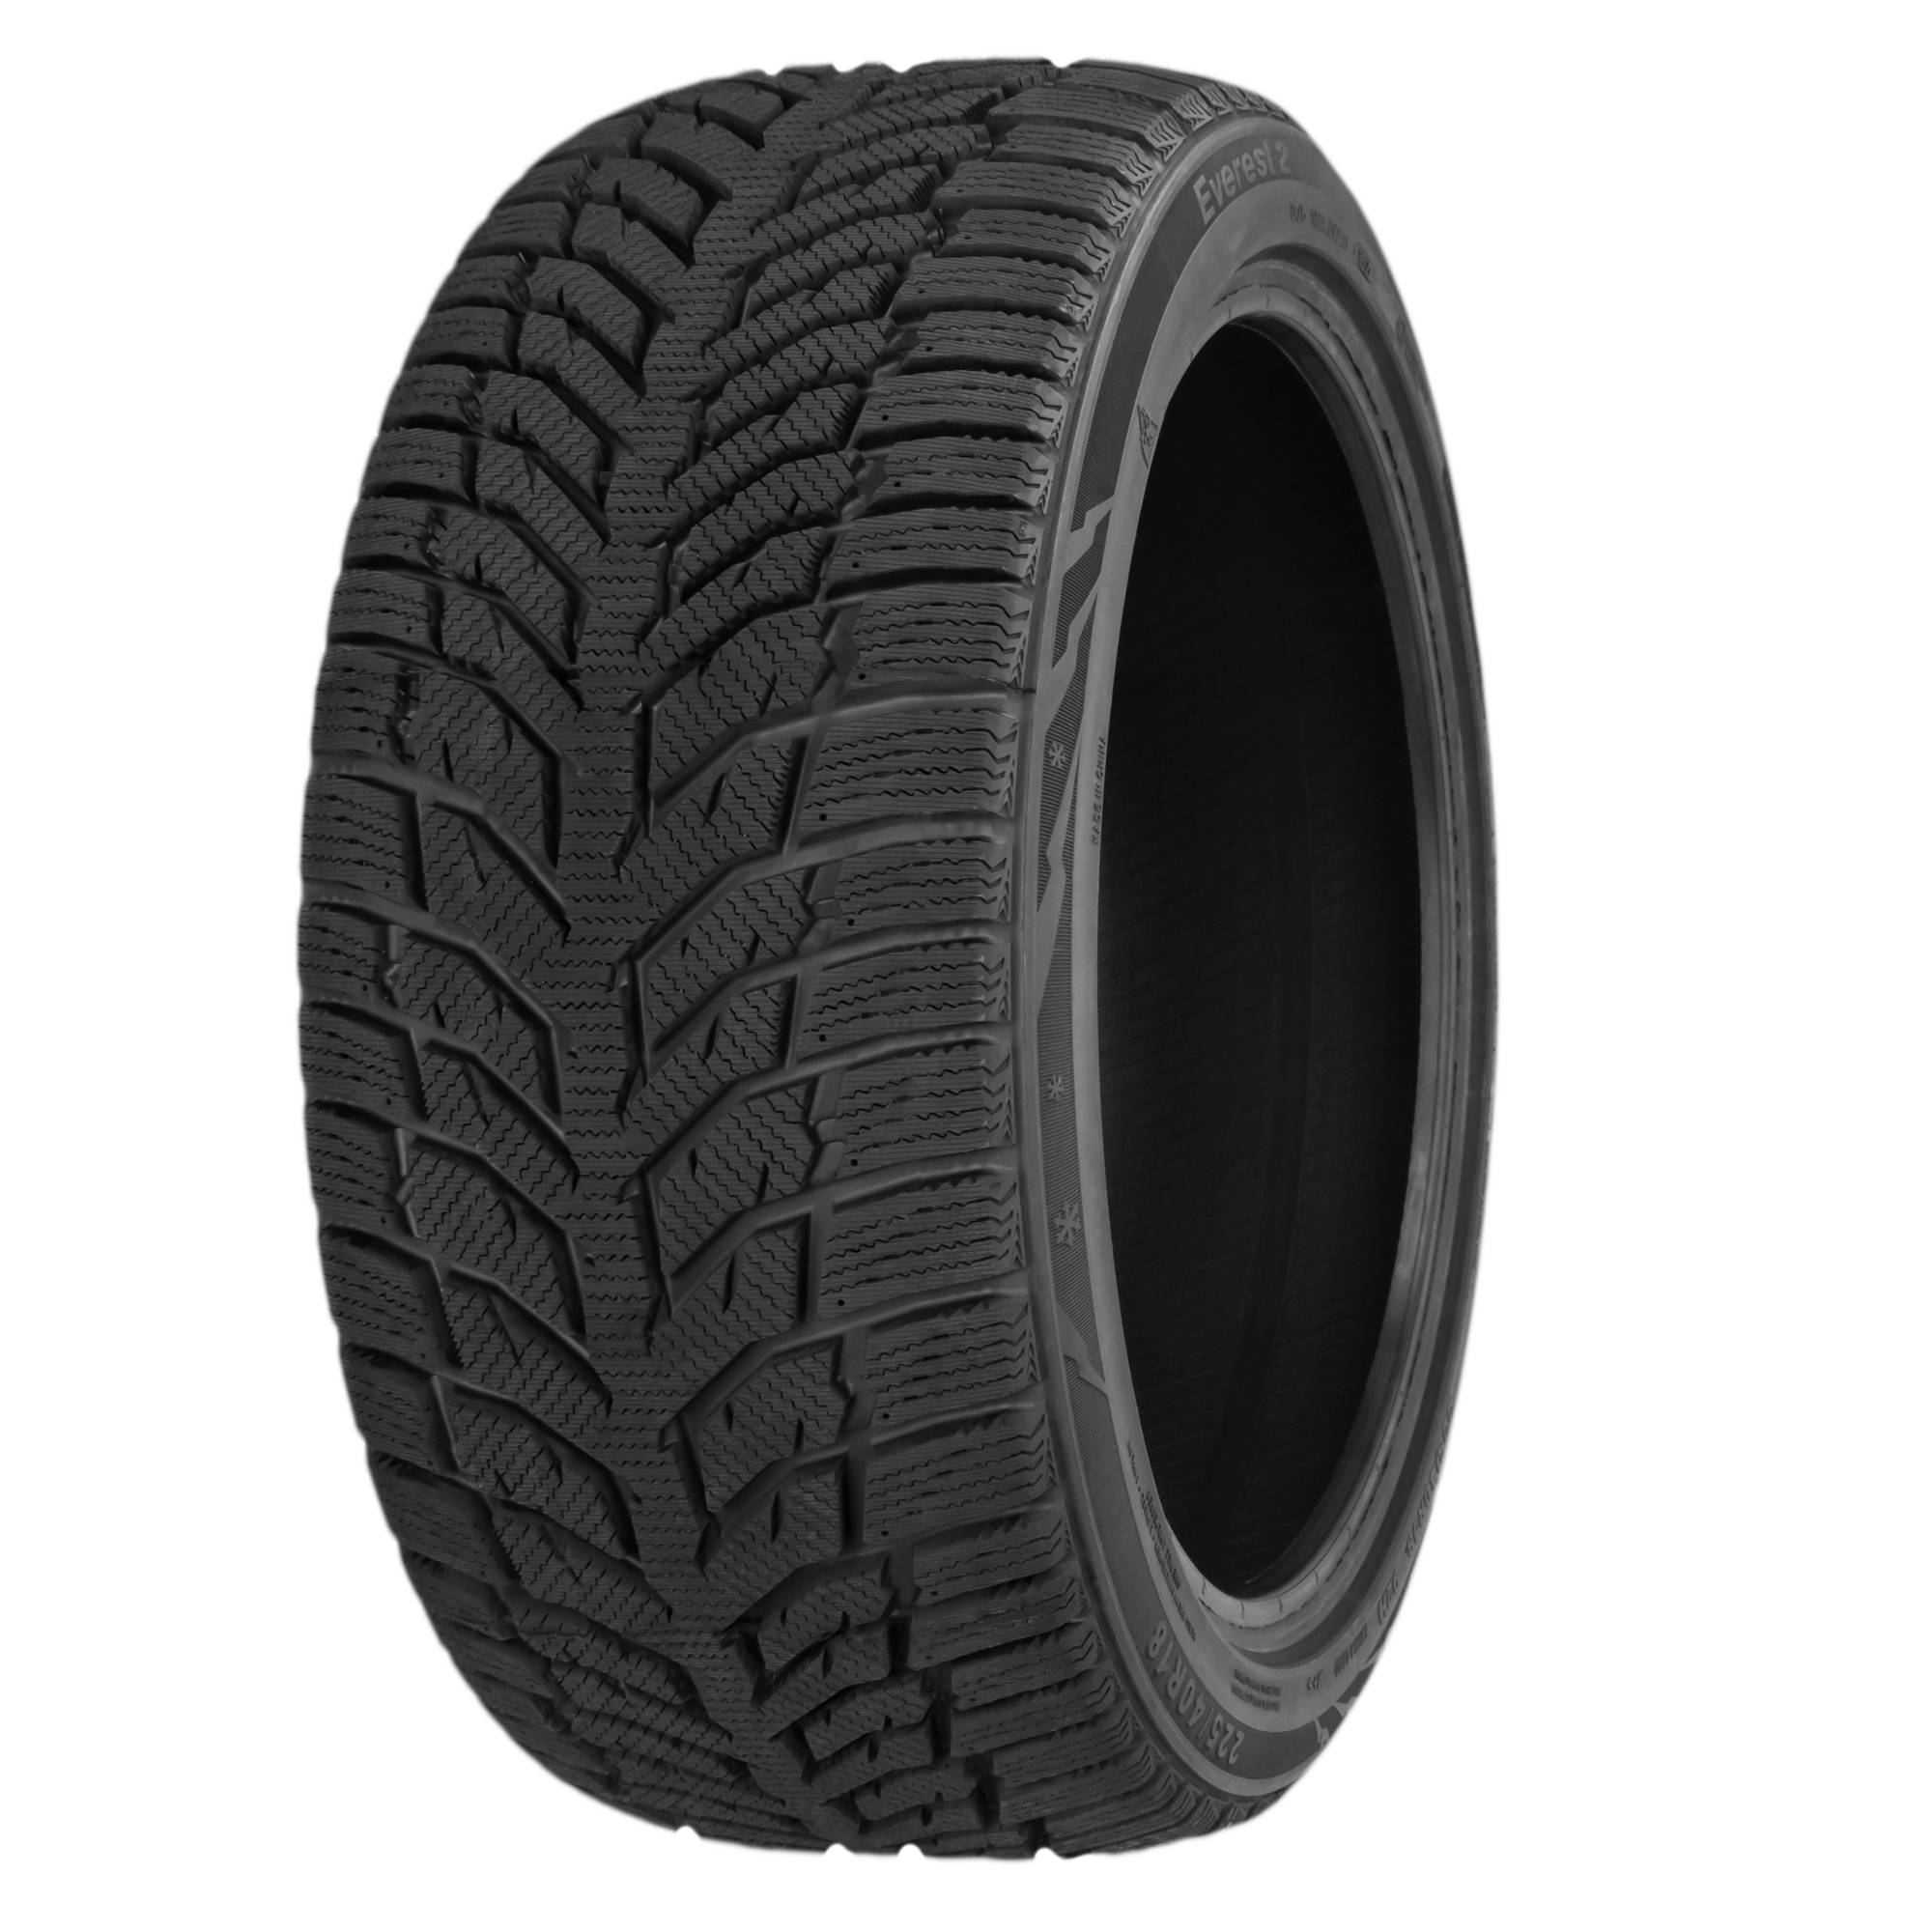 EAN 4250084605424, SYRON EVEREST 2 M+S 3PMSF, 195/55 R15 85 T